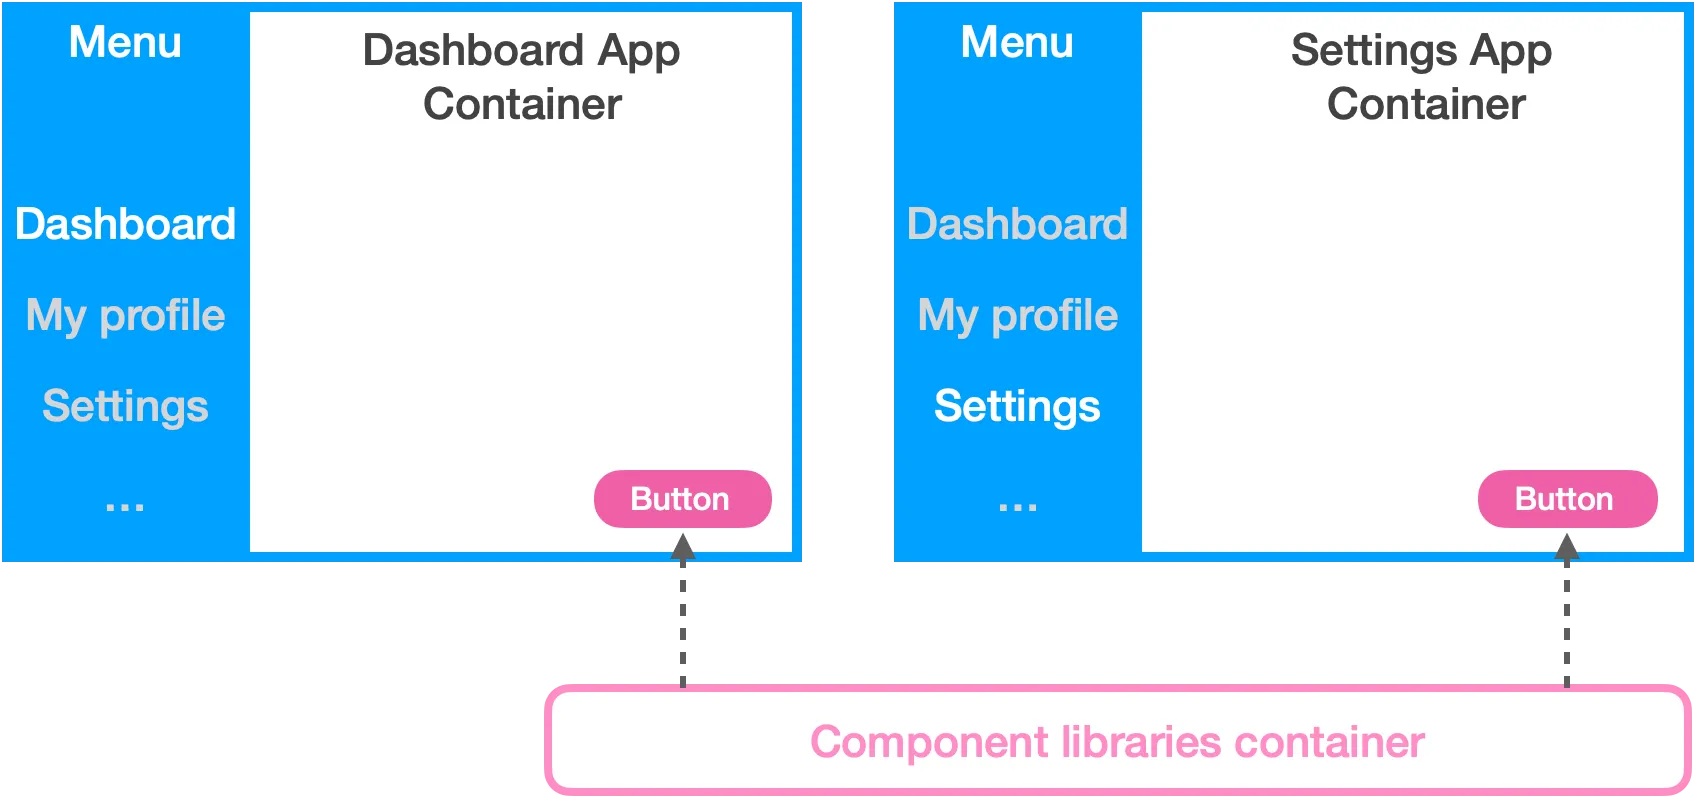 Apps containers consume the same component library container!